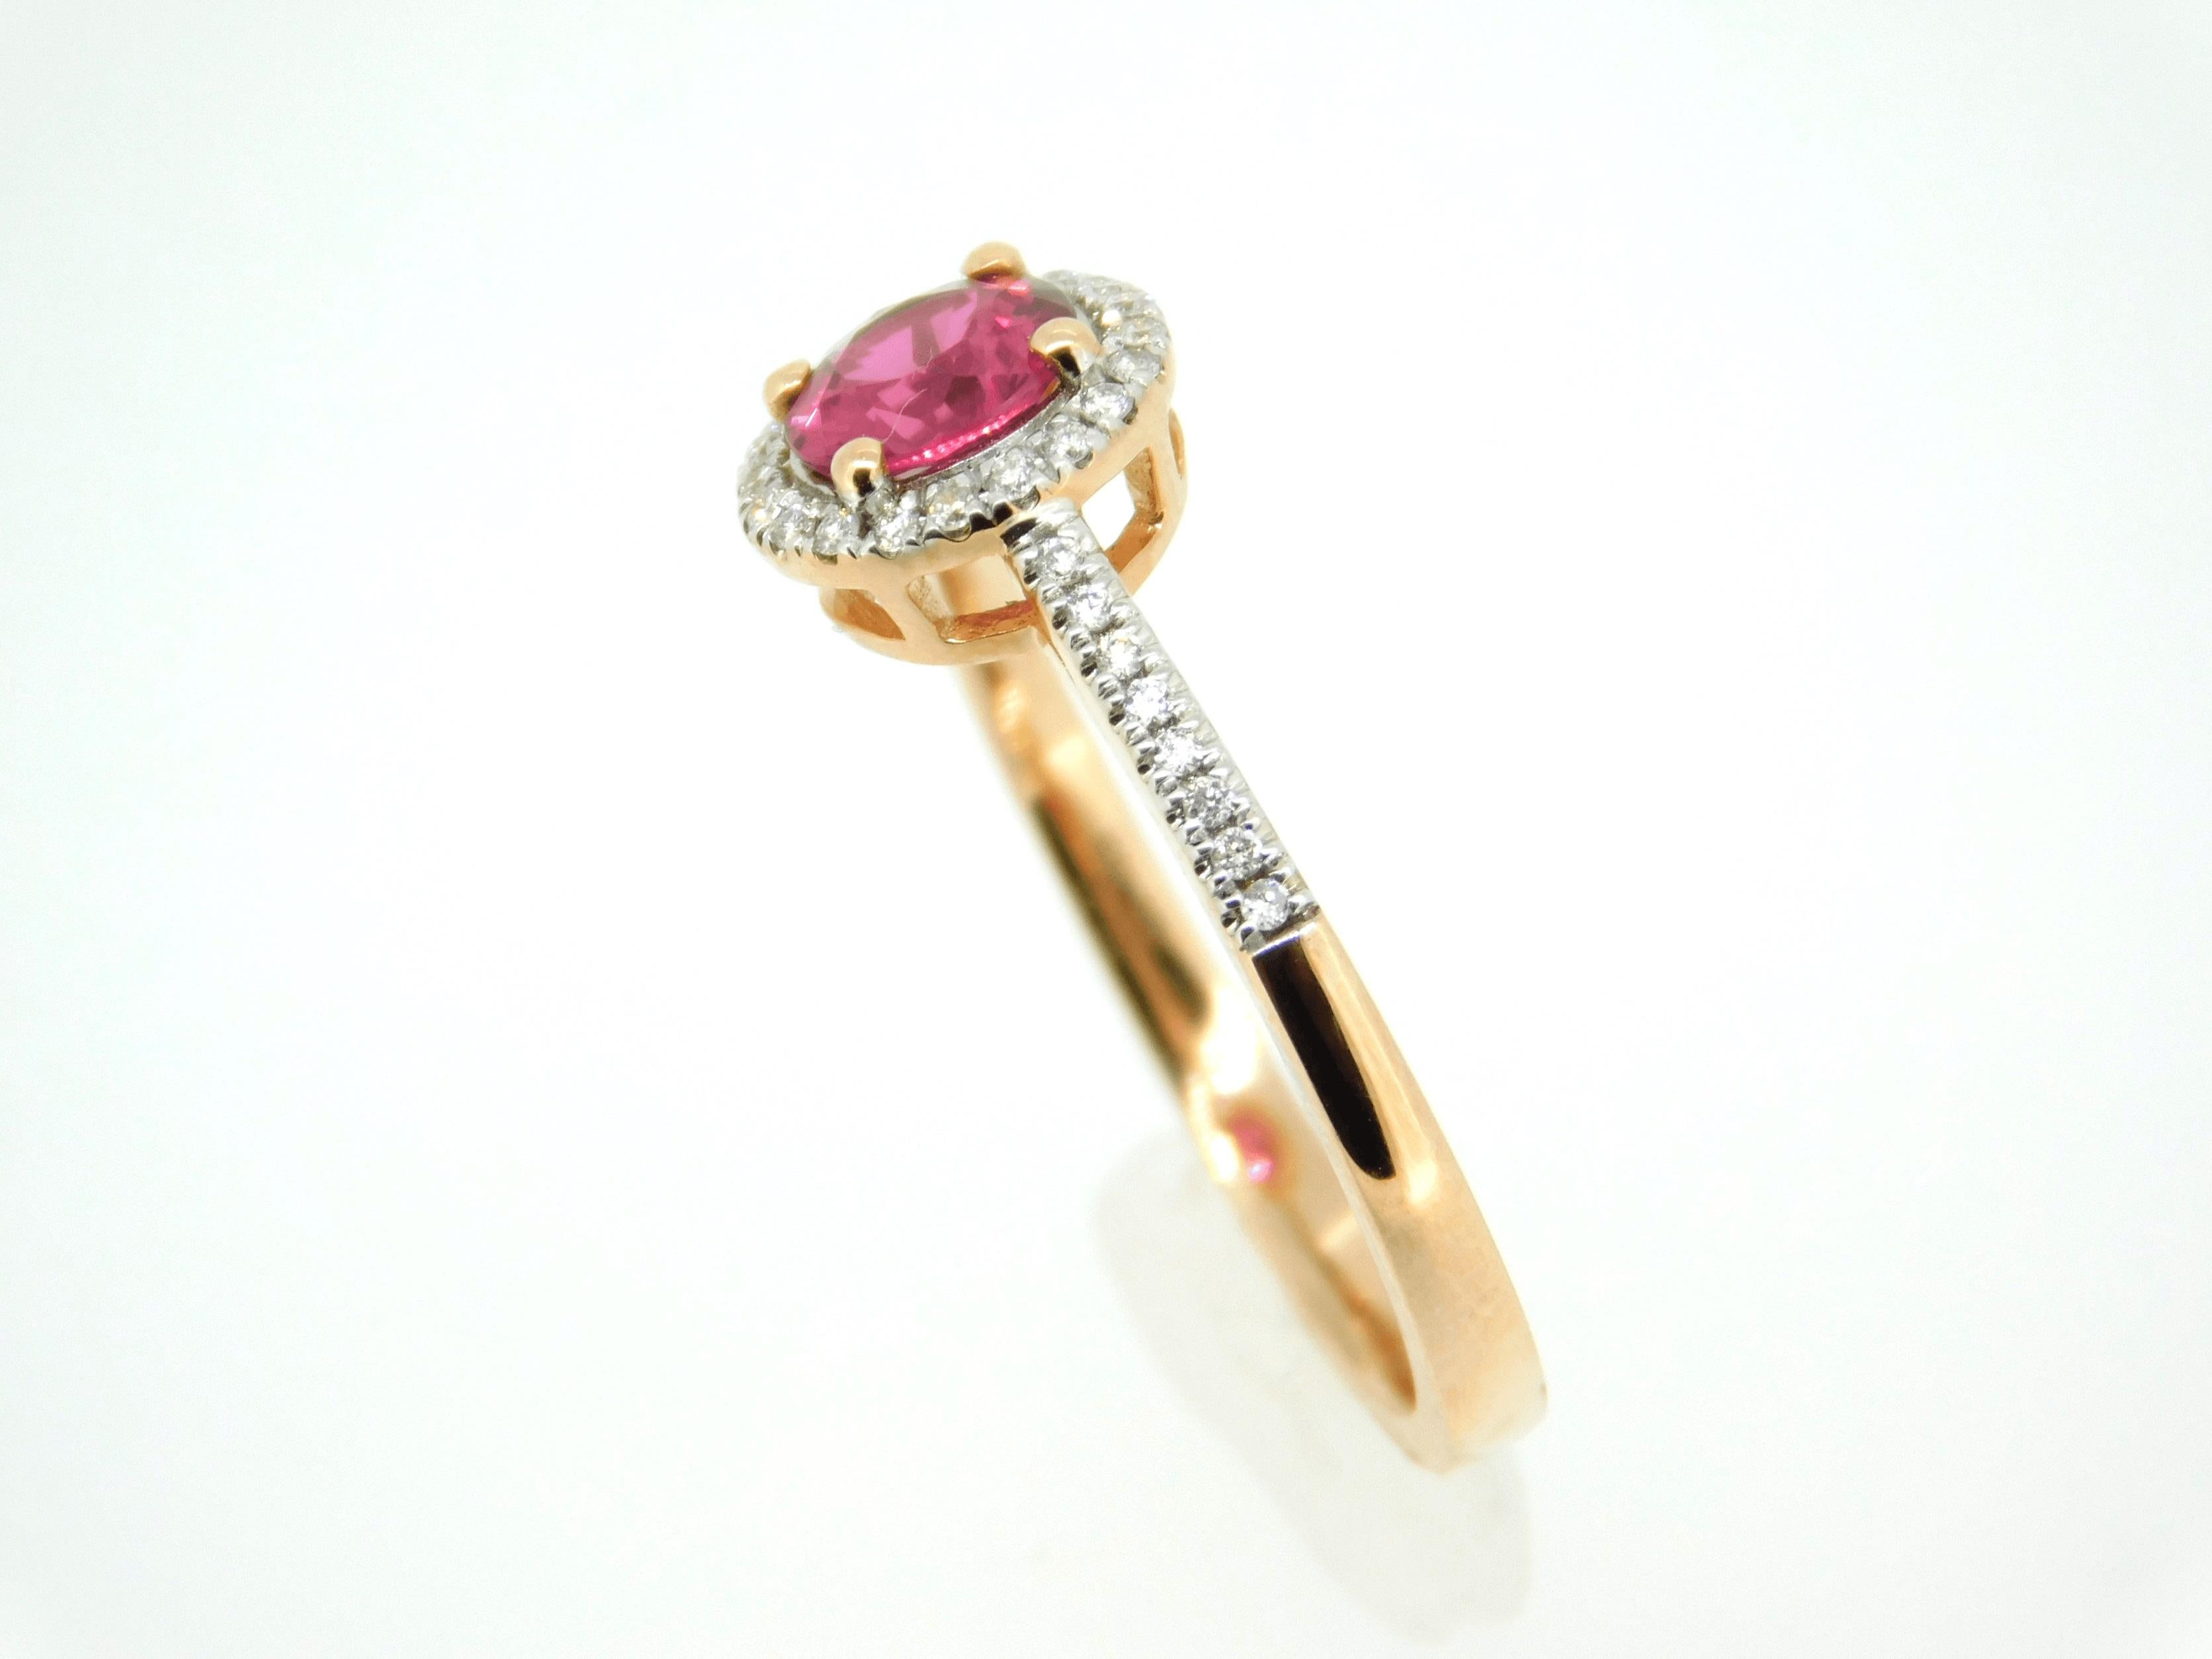 14k Rose Gold .72ct Pink Genuine Natural Sapphire Ring with Diamond Halo #J4450

14k rose gold pink sapphire ring with diamond halo. The pink is a very bright intense color. The sapphire weighs .72cts and measures 5.5mm. There is a halo of diamonds